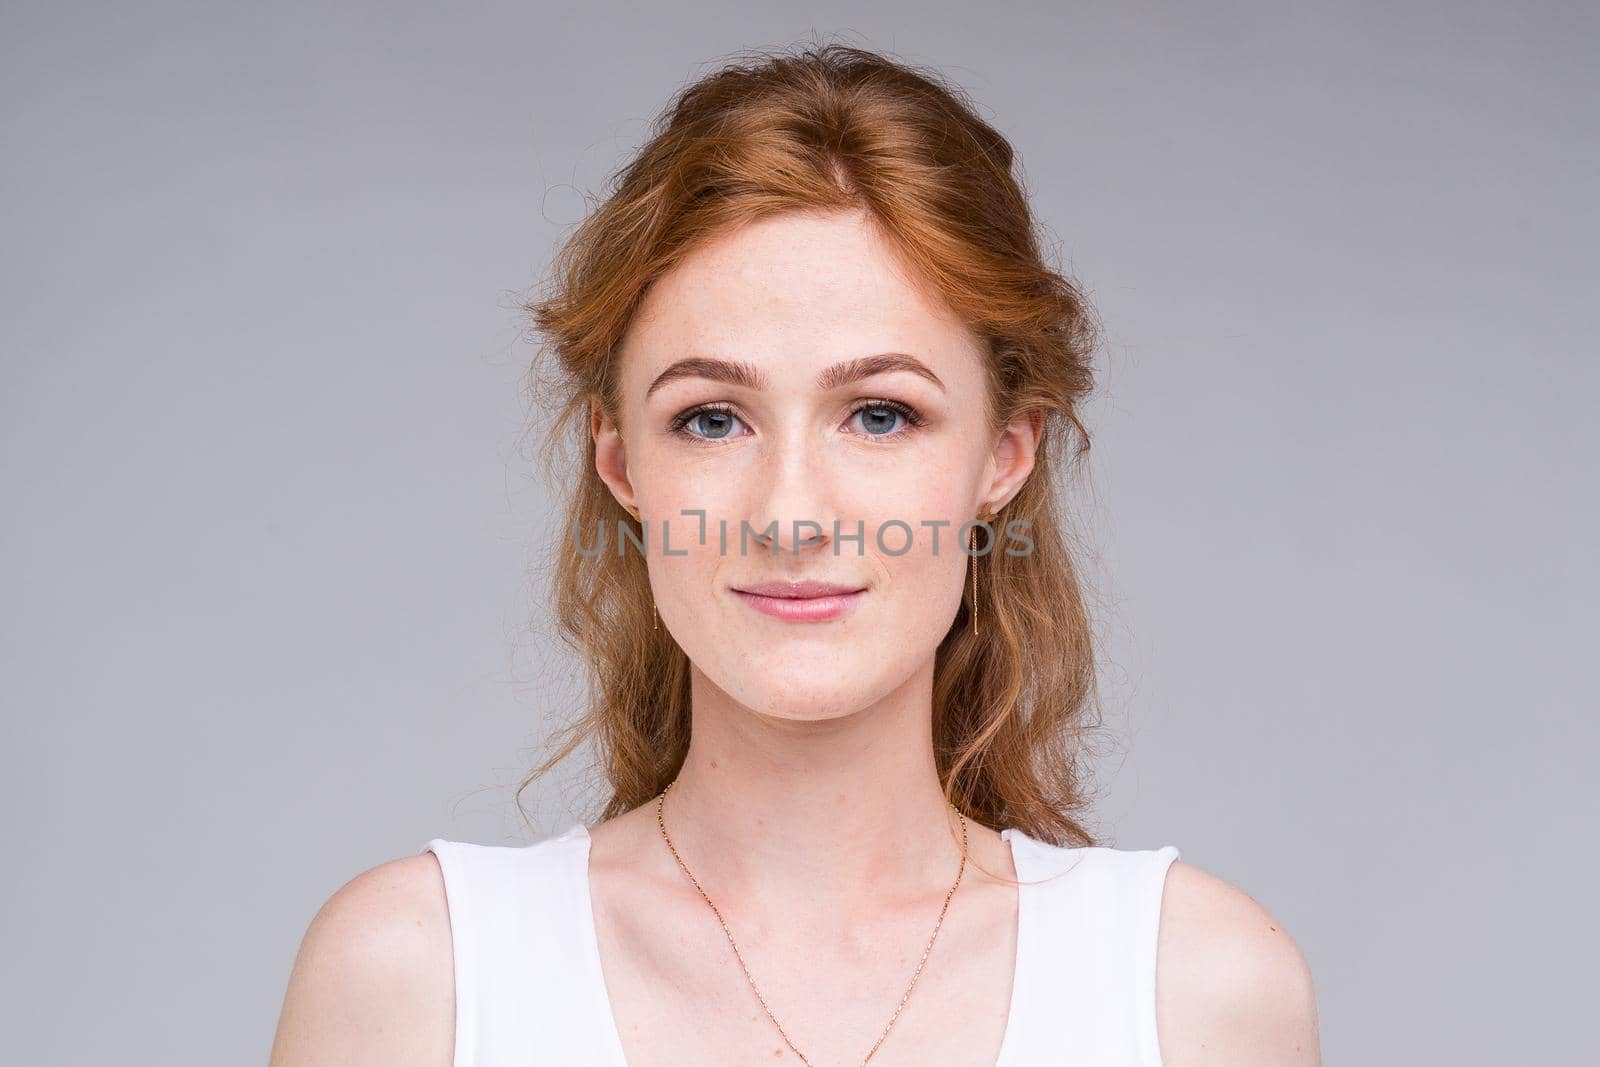 Closeup portrait young, beautiful business woman, student with lred, curly hair and freckles on face on gray background in the studio. Dressed in white blouse with short sleeves about open shoulders.